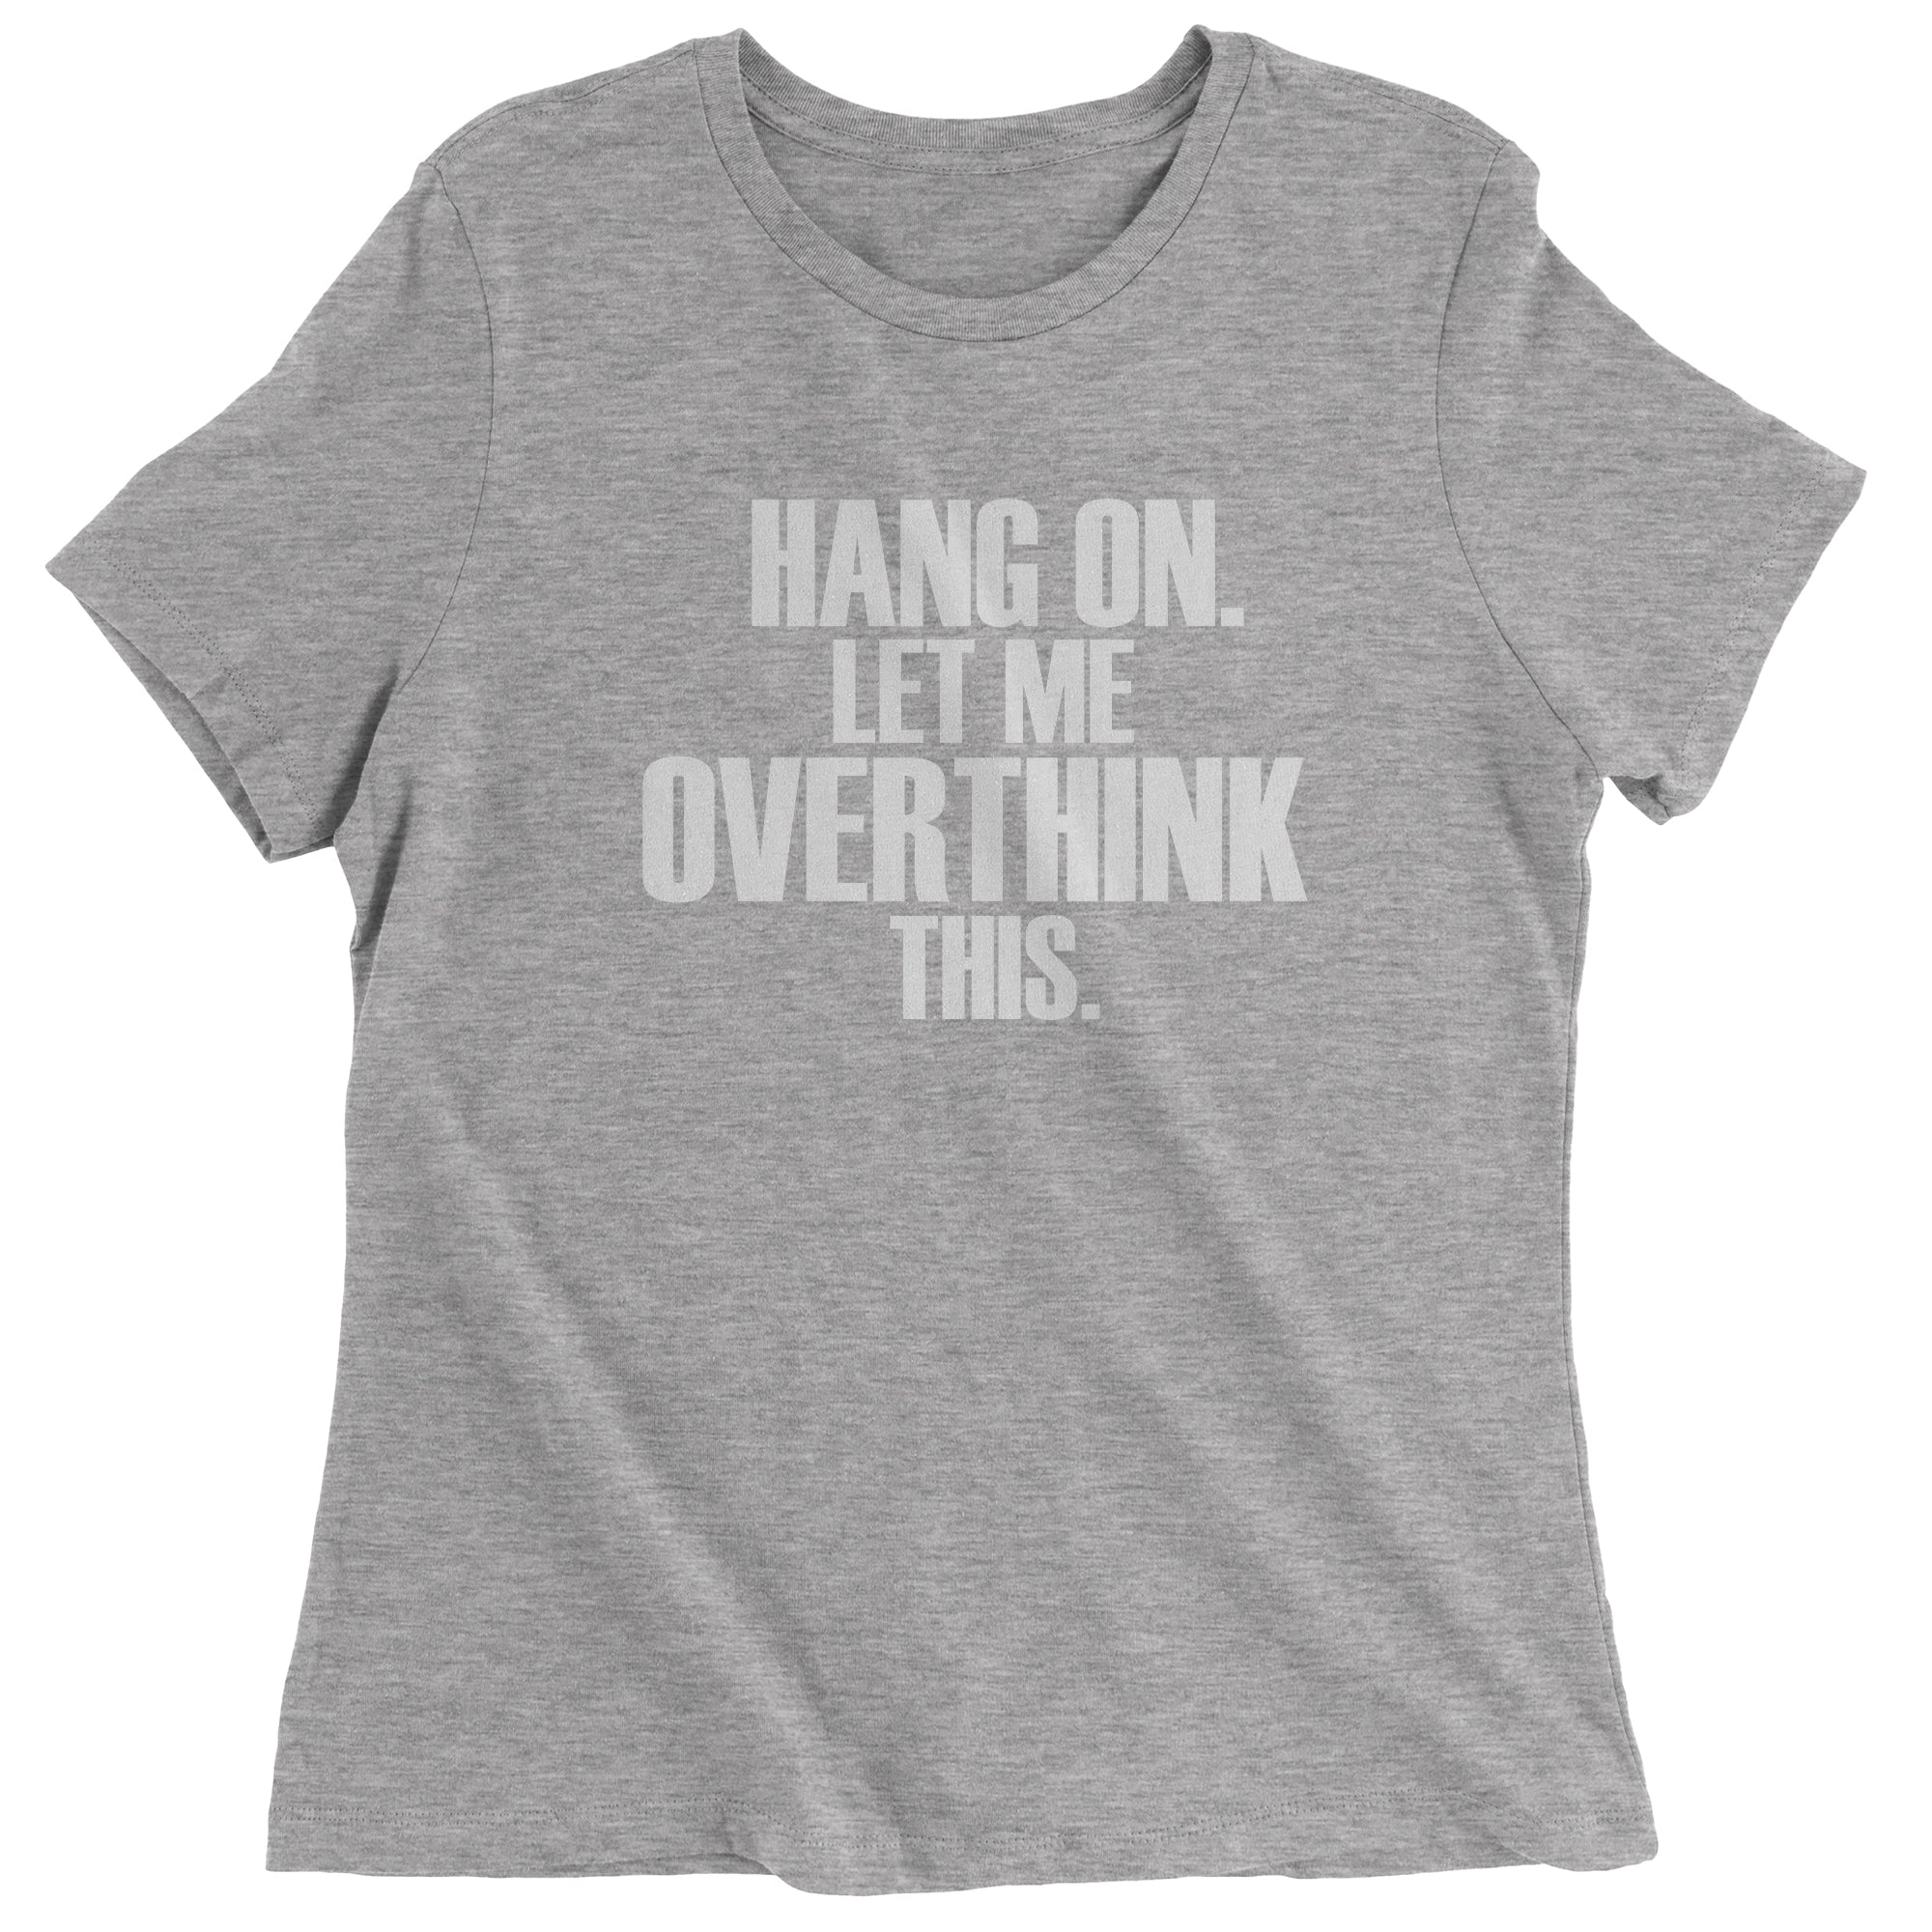 Hold on let me overthink this funny Women's T-Shirt